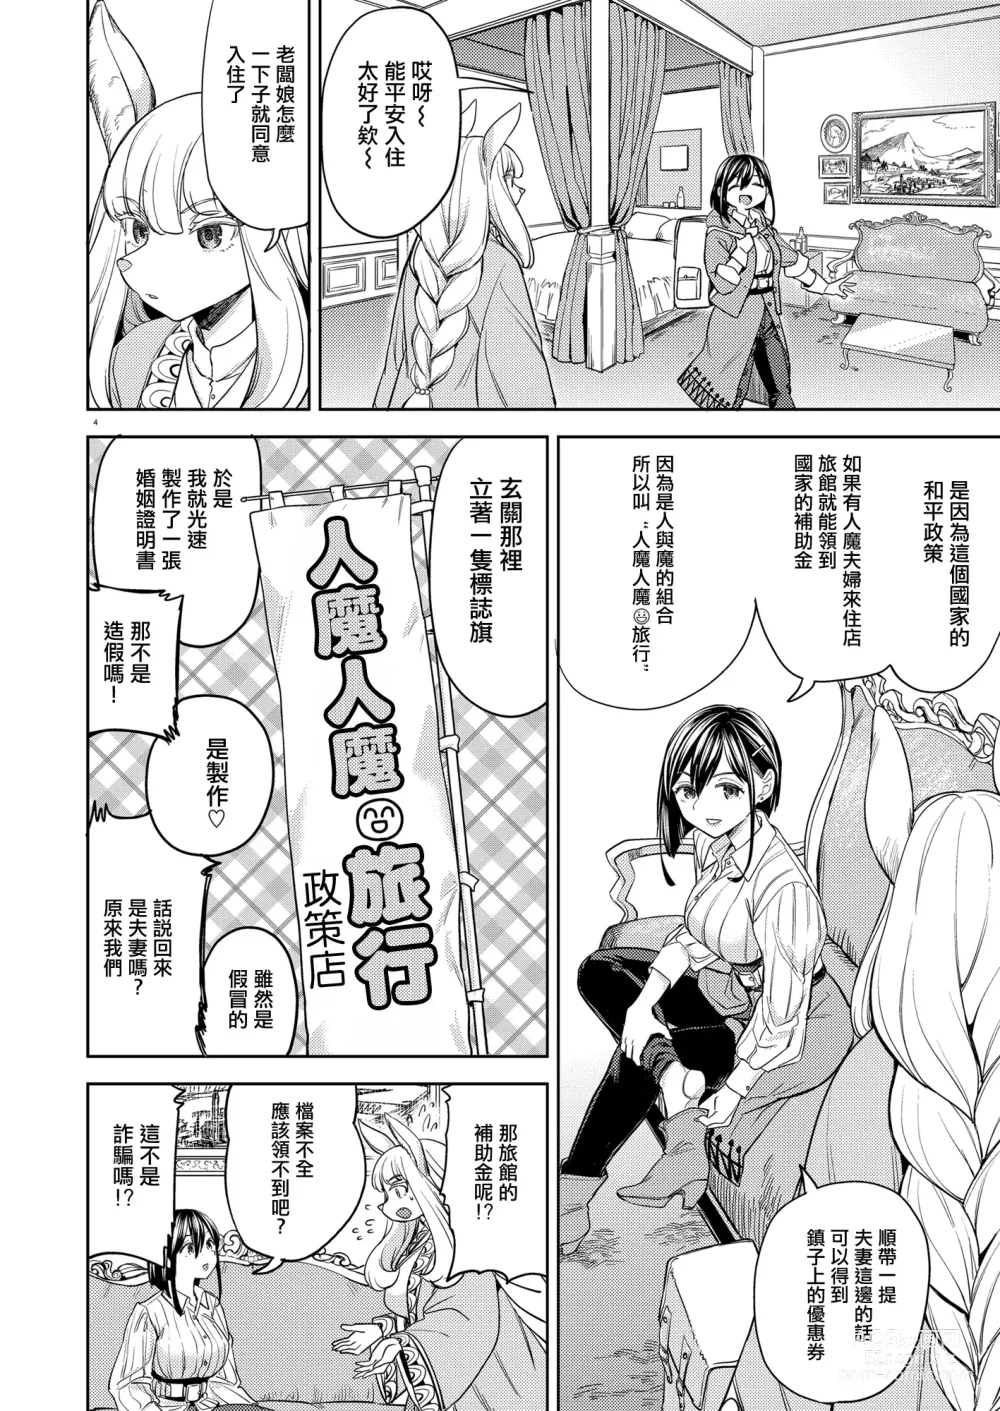 Page 8 of doujinshi 來一場蜜月旅行